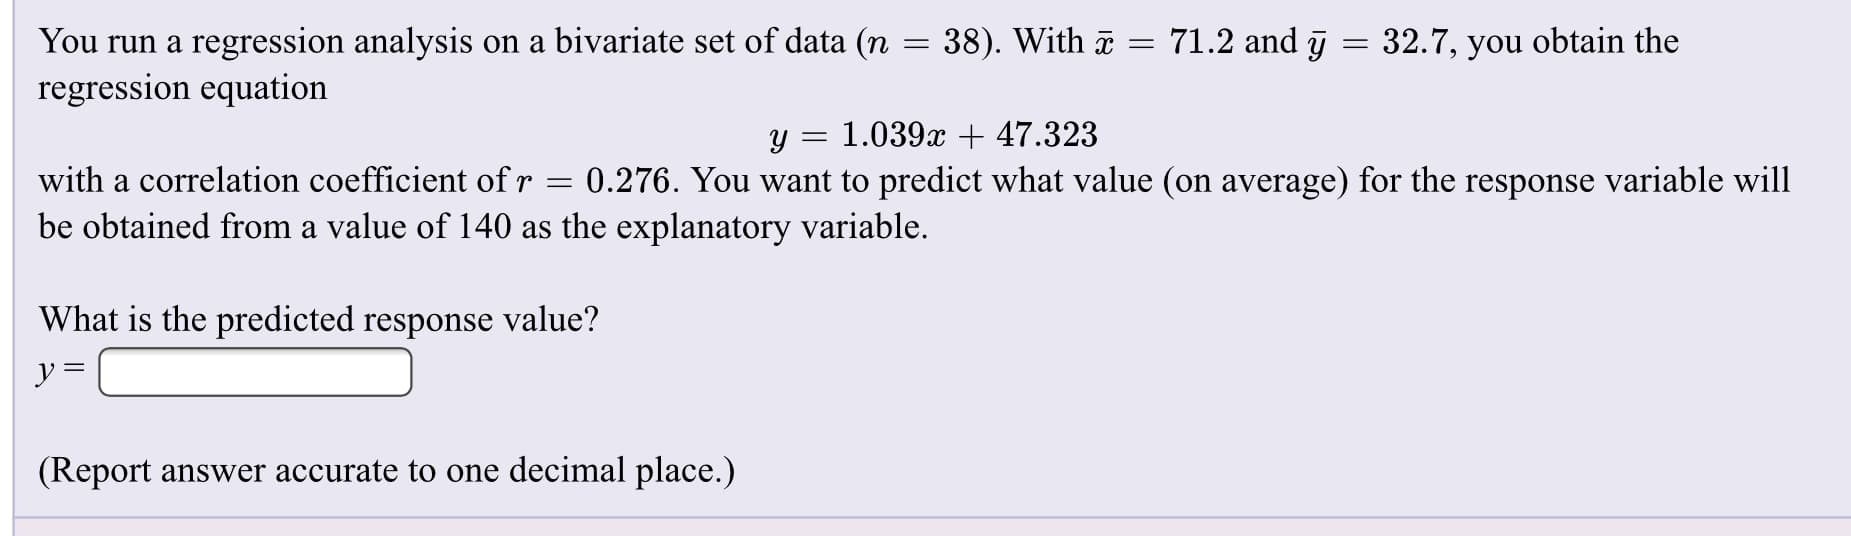 You run a regression analysis on a bivariate set of data (n = 38). With = 71.2 and ī = 32.7, you obtain the
regression equation
1.039x + 47.323
with a correlation coefficient of r
0.276. You want to predict what value (on average) for the response variable will
be obtained from a value of 140 as the explanatory variable.
What is the predicted response value?
ソ=
